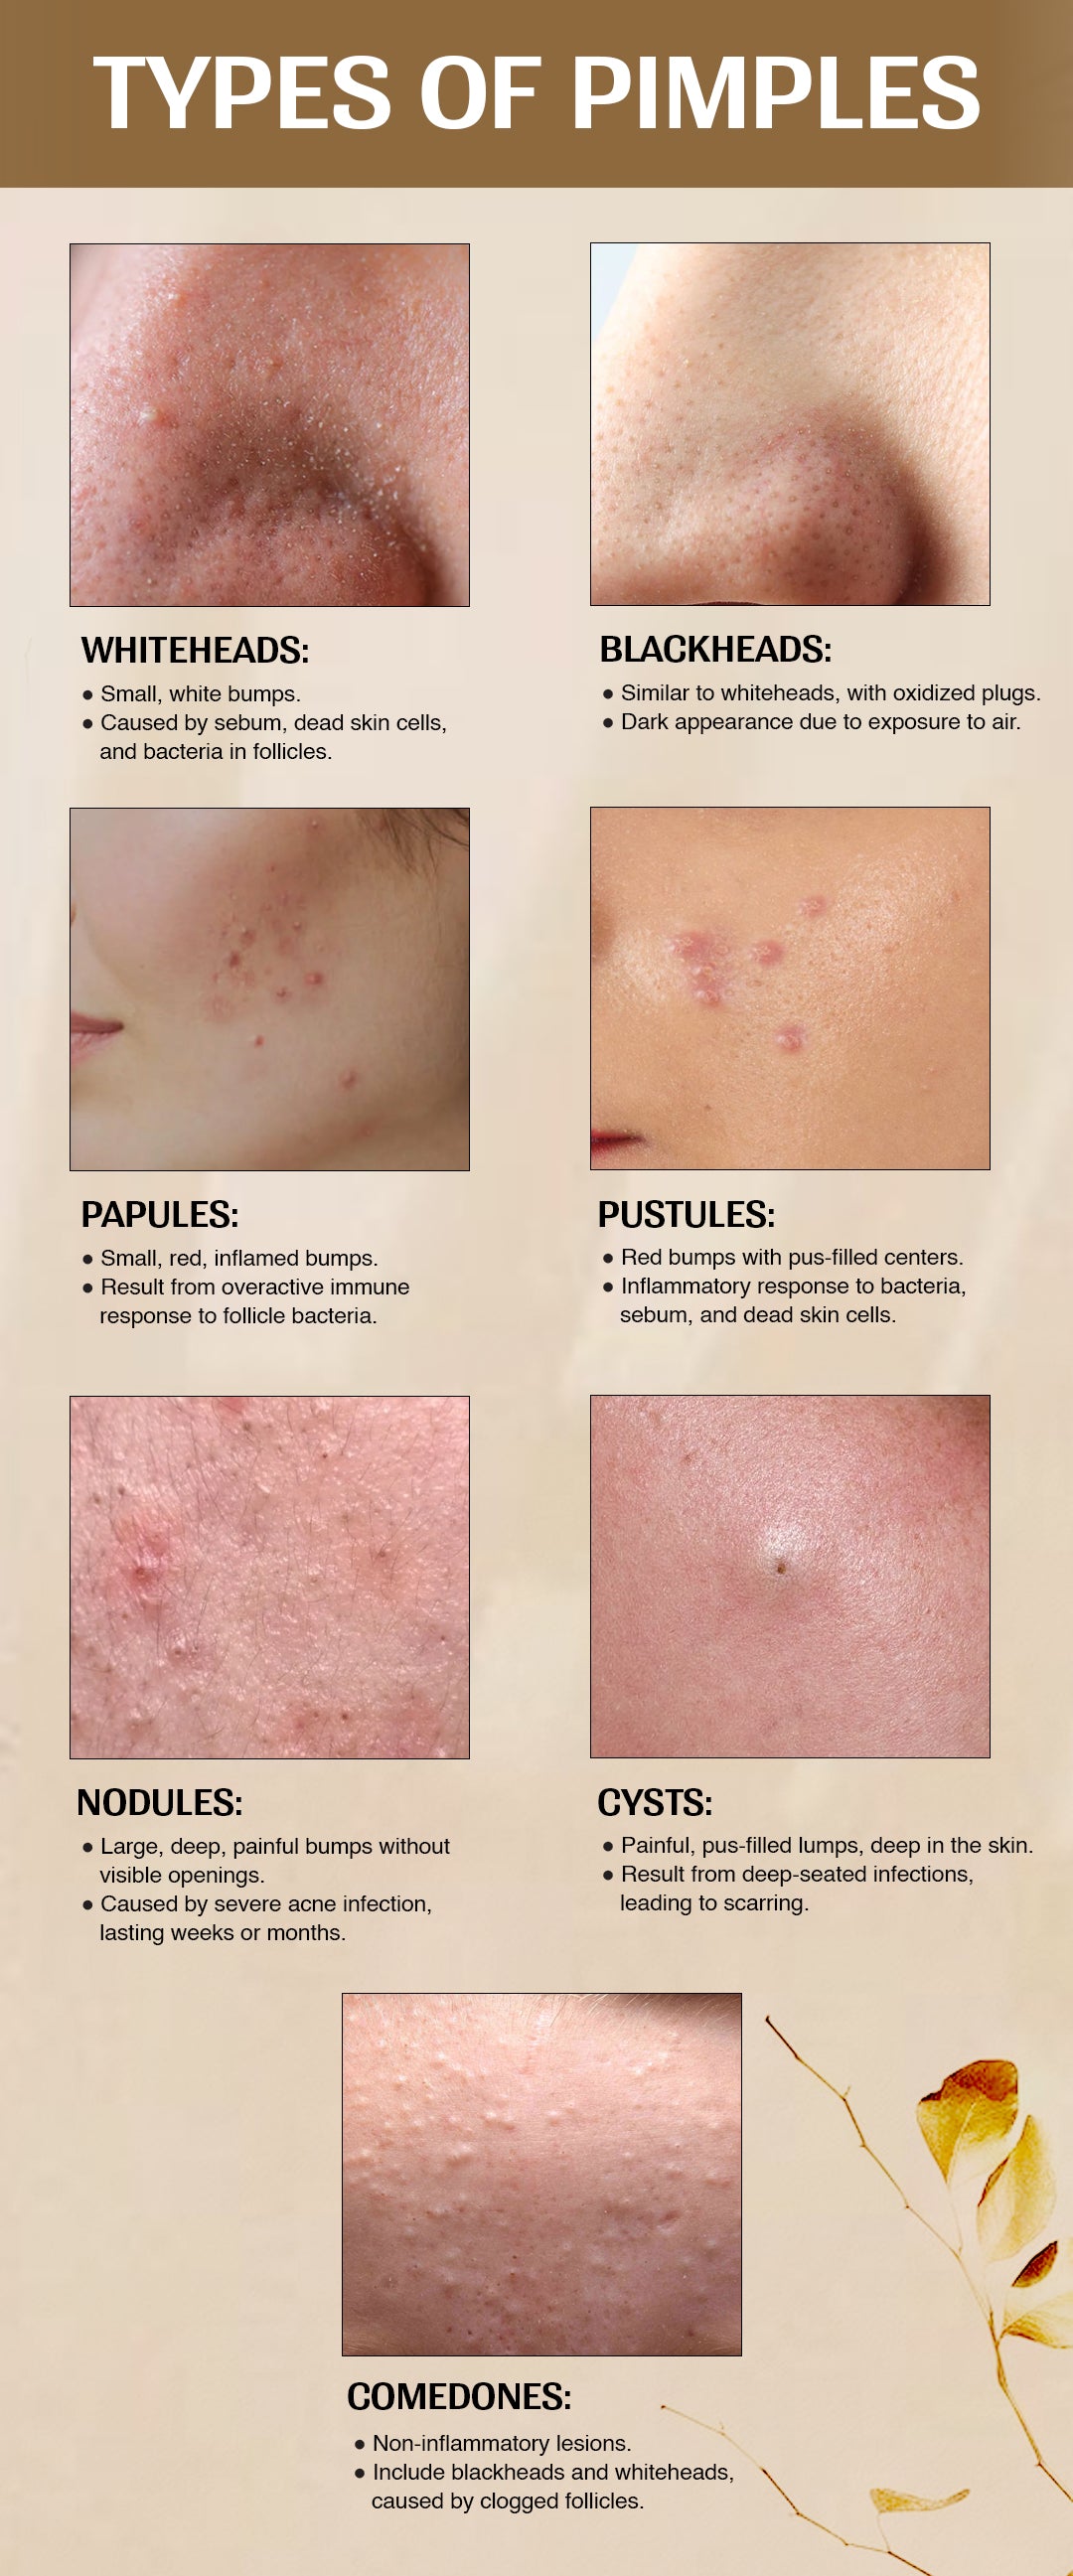 Types of Pimples